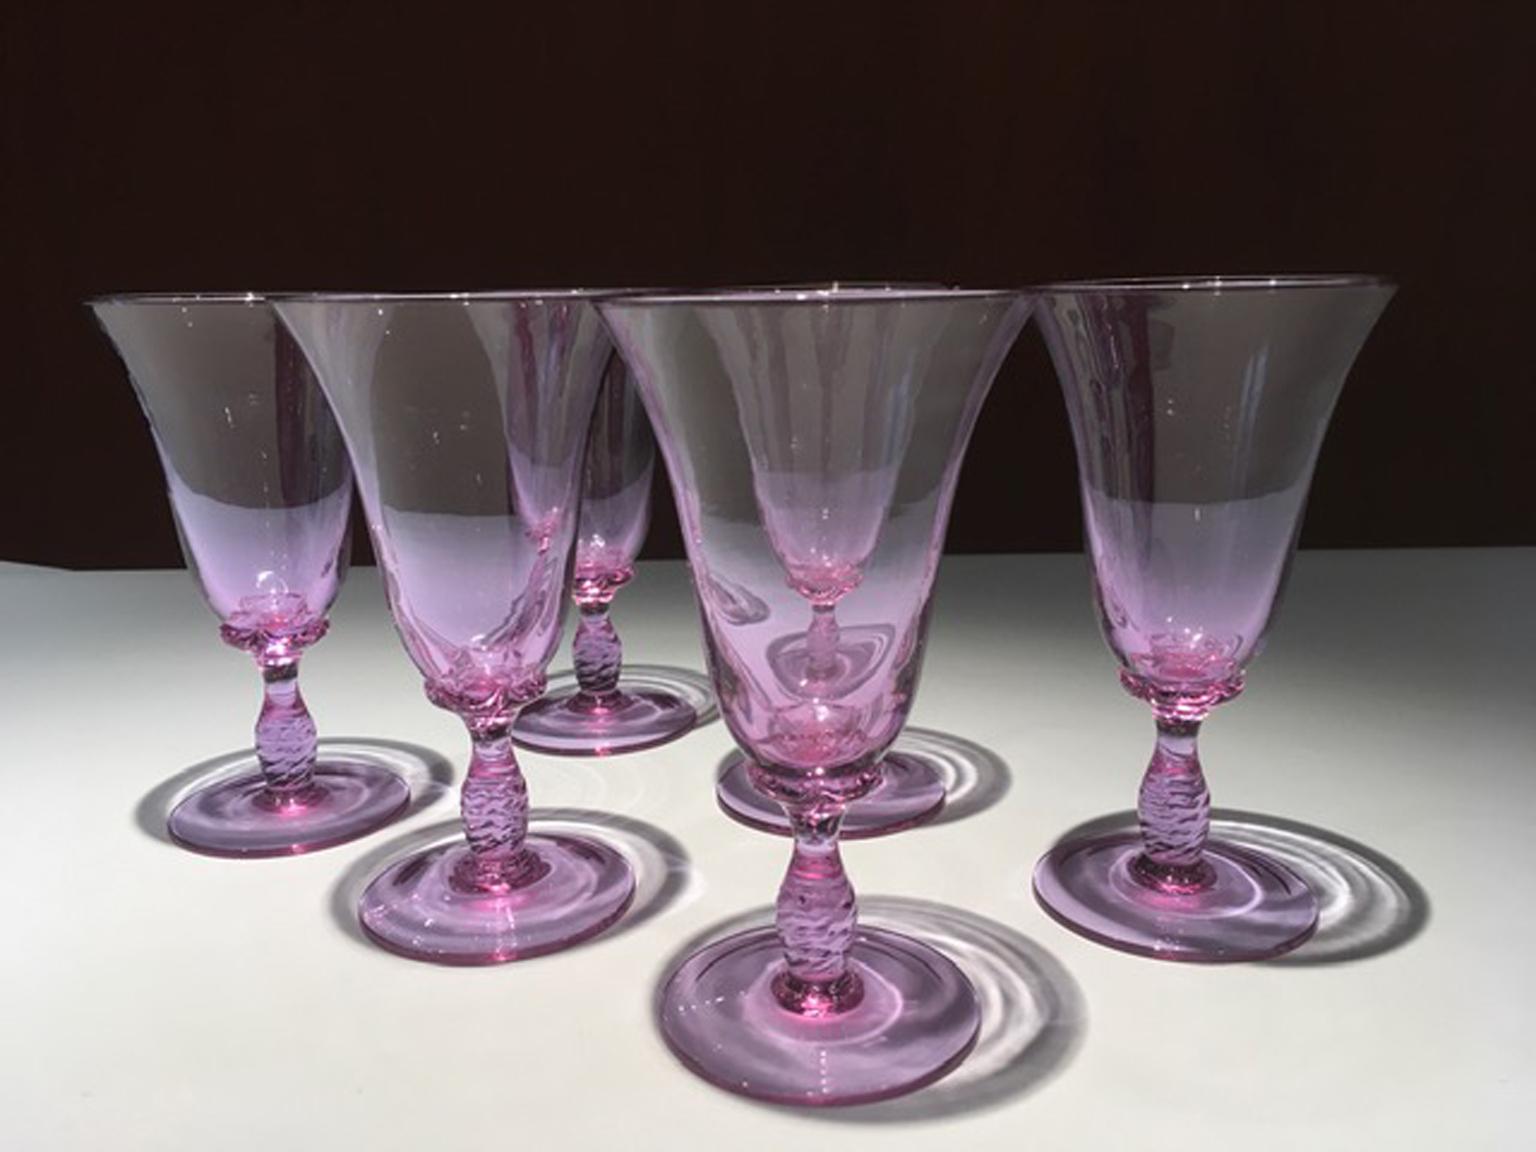 This set of Murano purple blown glass glasses, was hand made in Murano, Venice in Mid-Century, 1960 circa.  This is a very elegant and fine glasses set to use to arrange an holiday table dining or to show among an antique pieces collection.
The